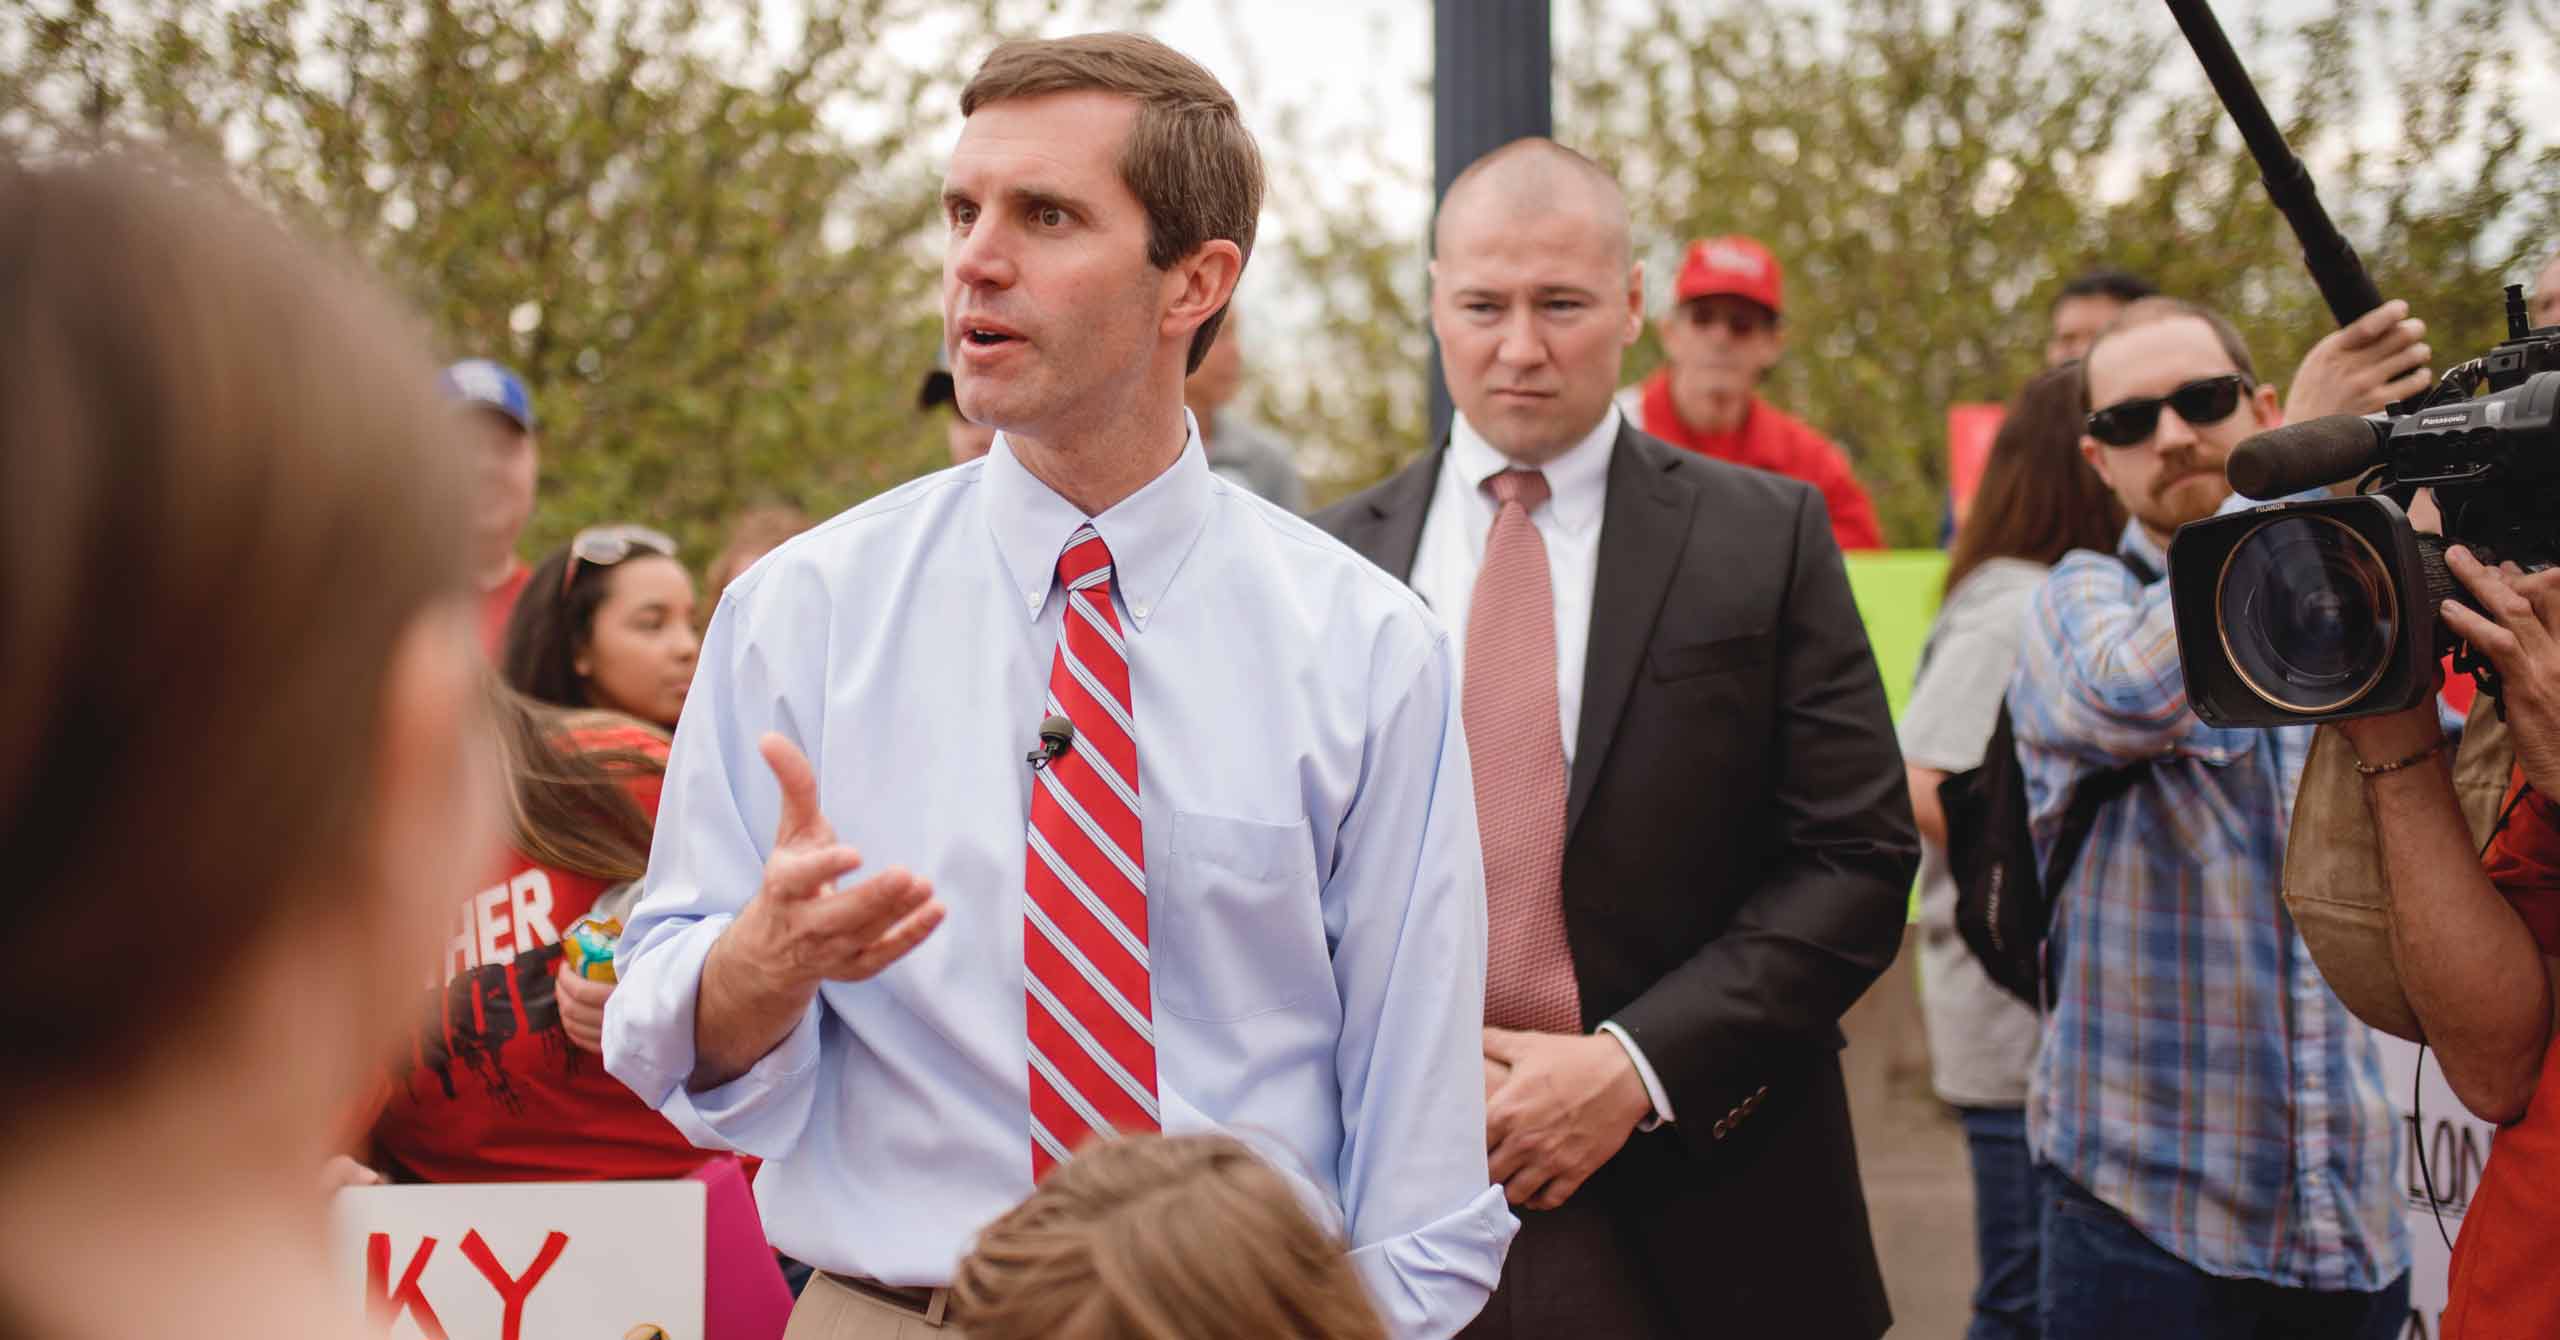 Kentucky Attorney General Andy Beshear is challenging Gov. Matt Bevin in the November election – and is also expected to challenge Bevin's changes to Medicaid if he's elected.